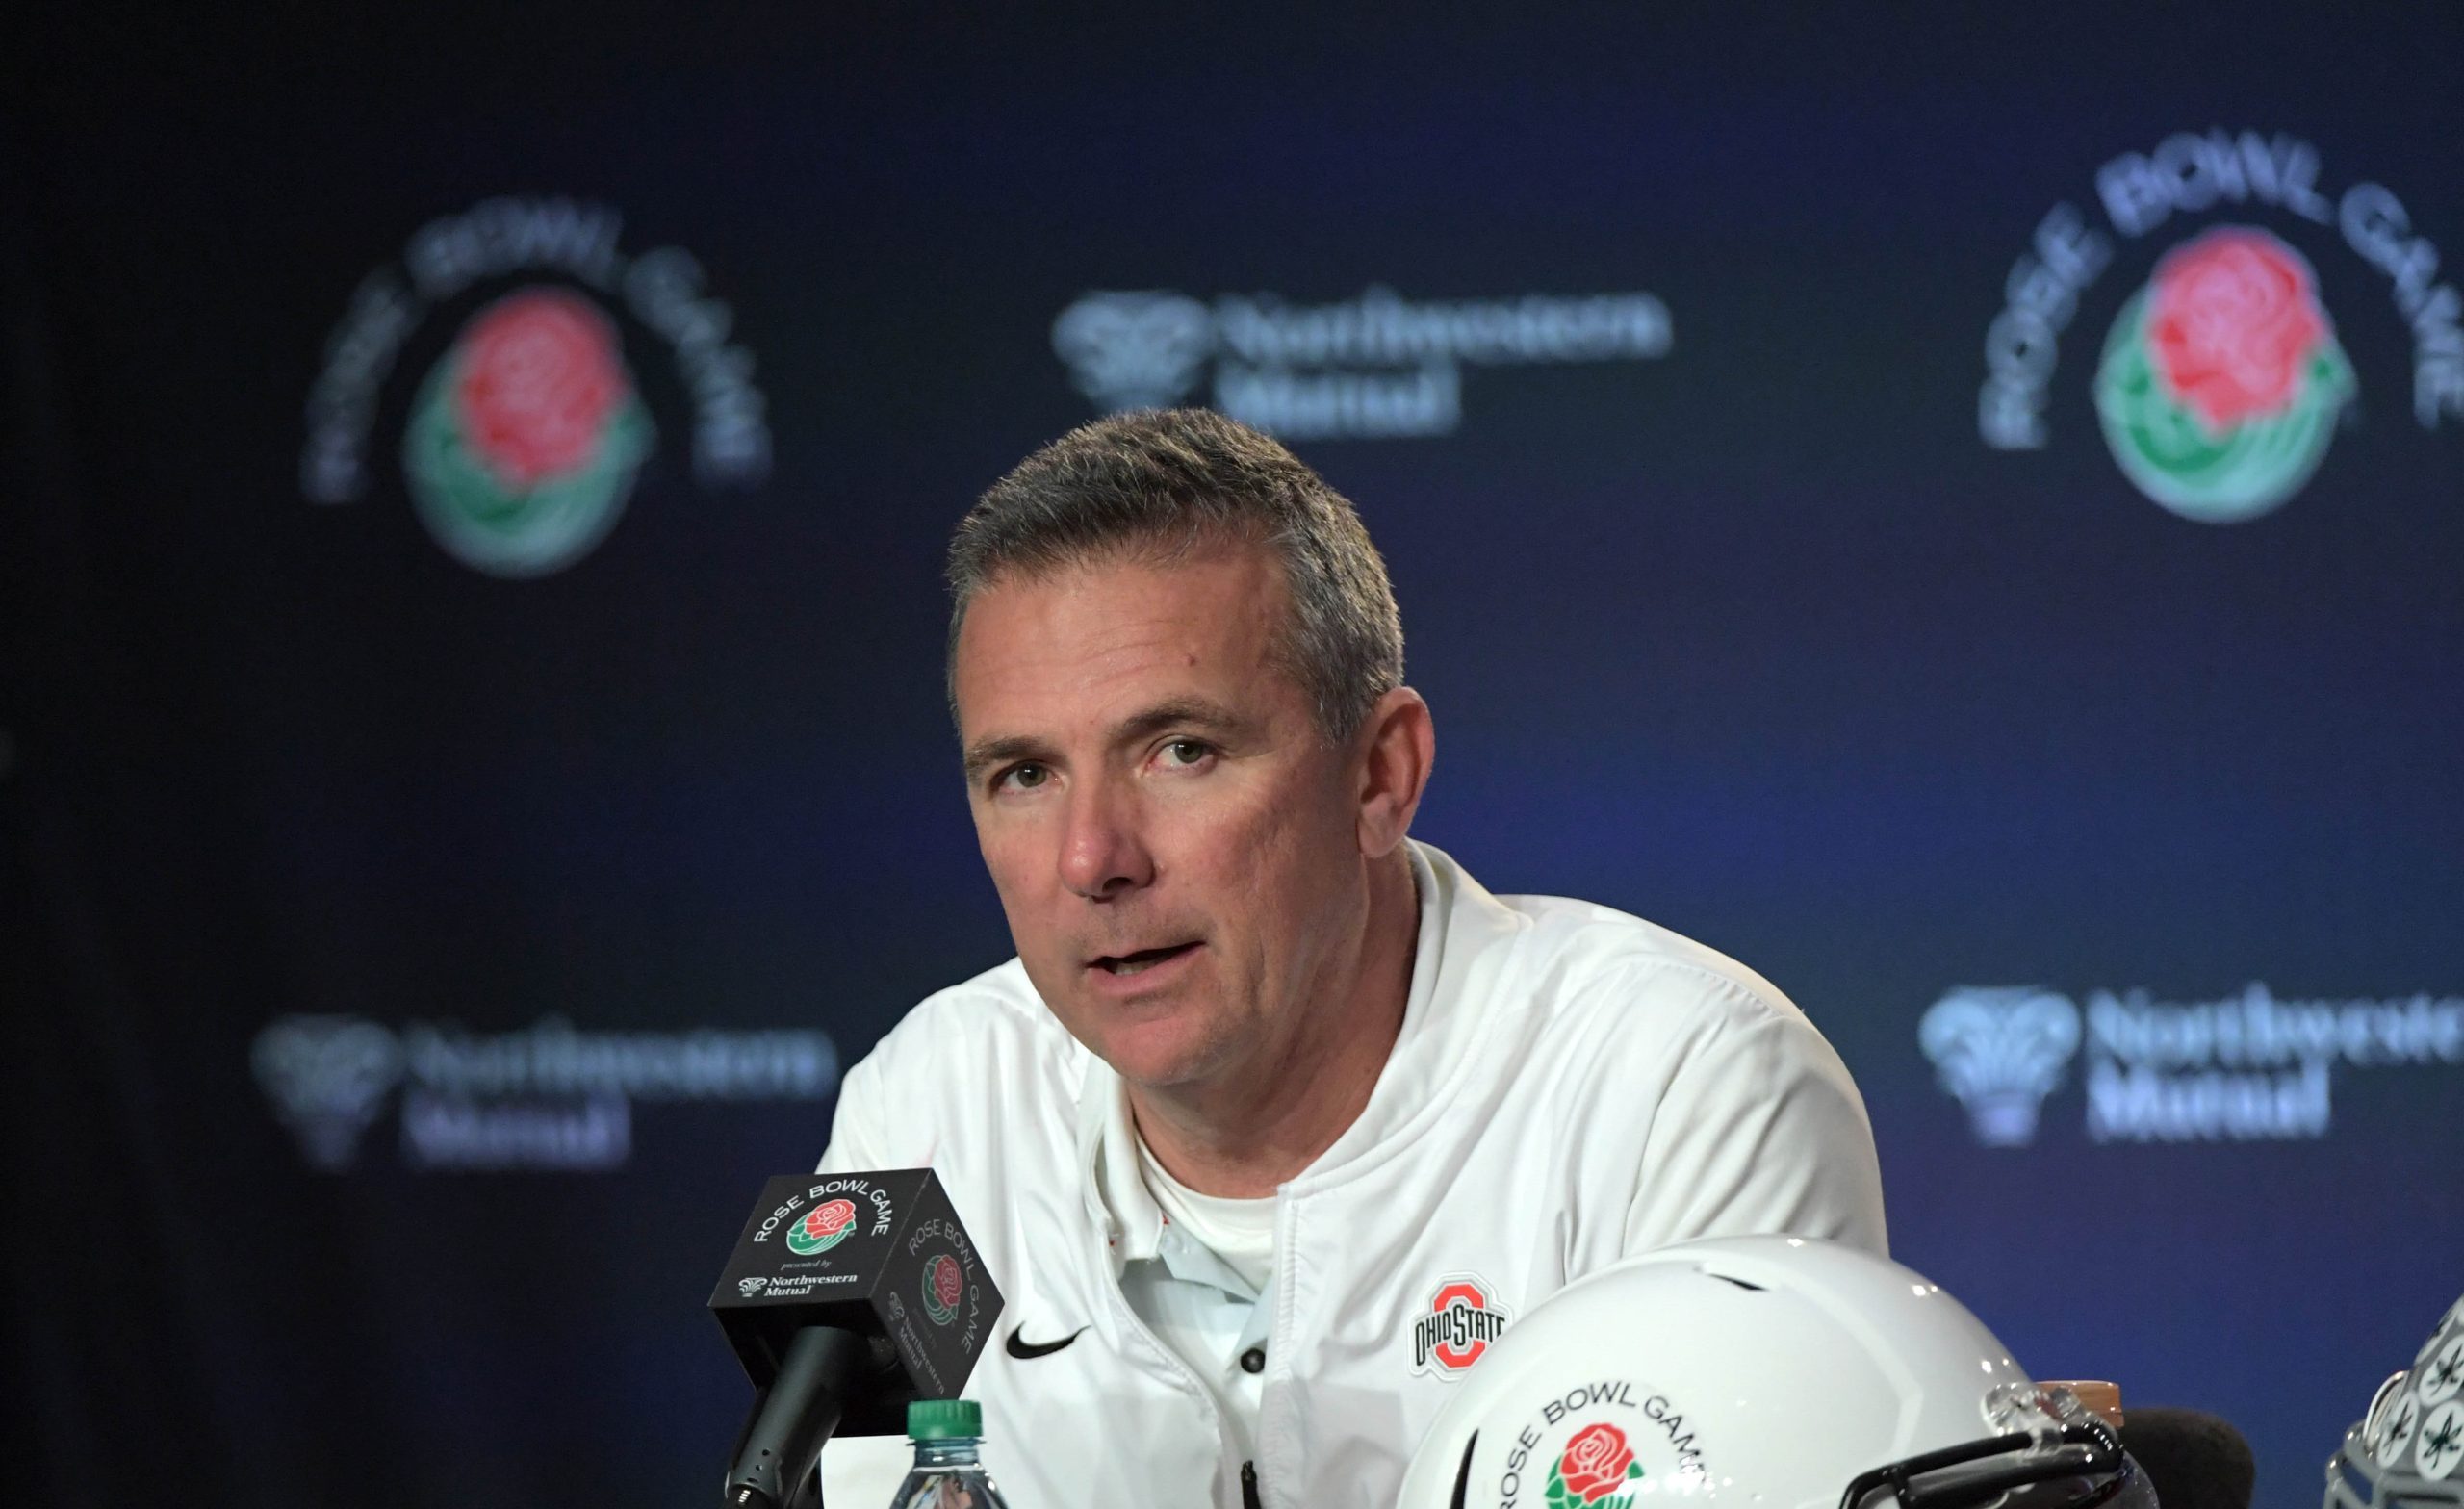 Urban Meyer shares thoughts on Big Ten expansion